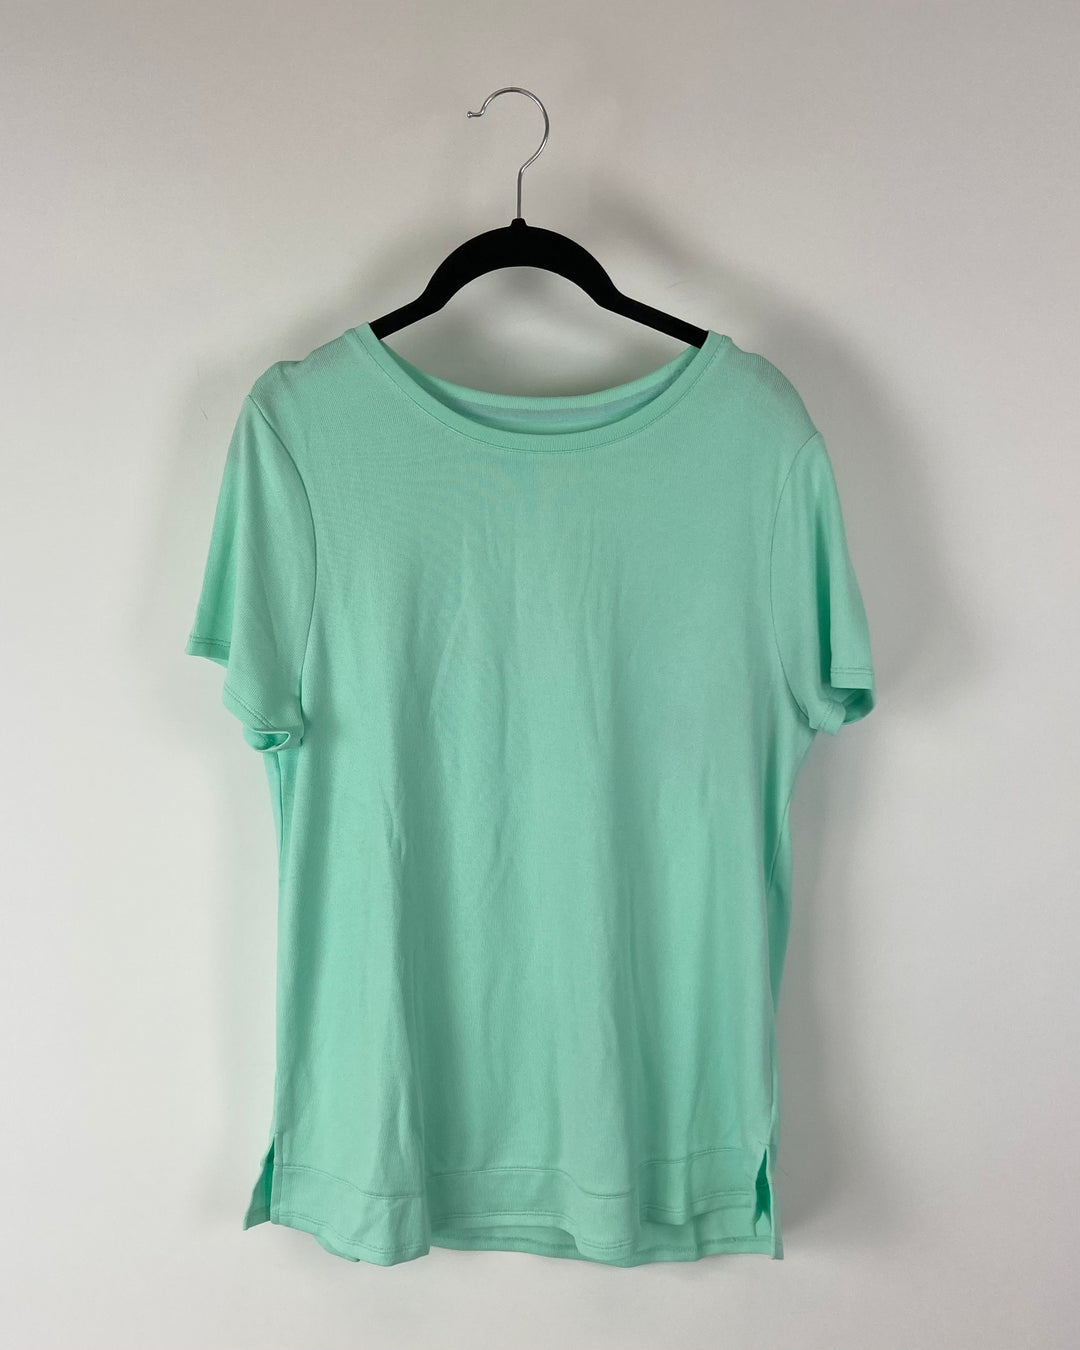 Teal Short Sleeve Top - Size 6/8